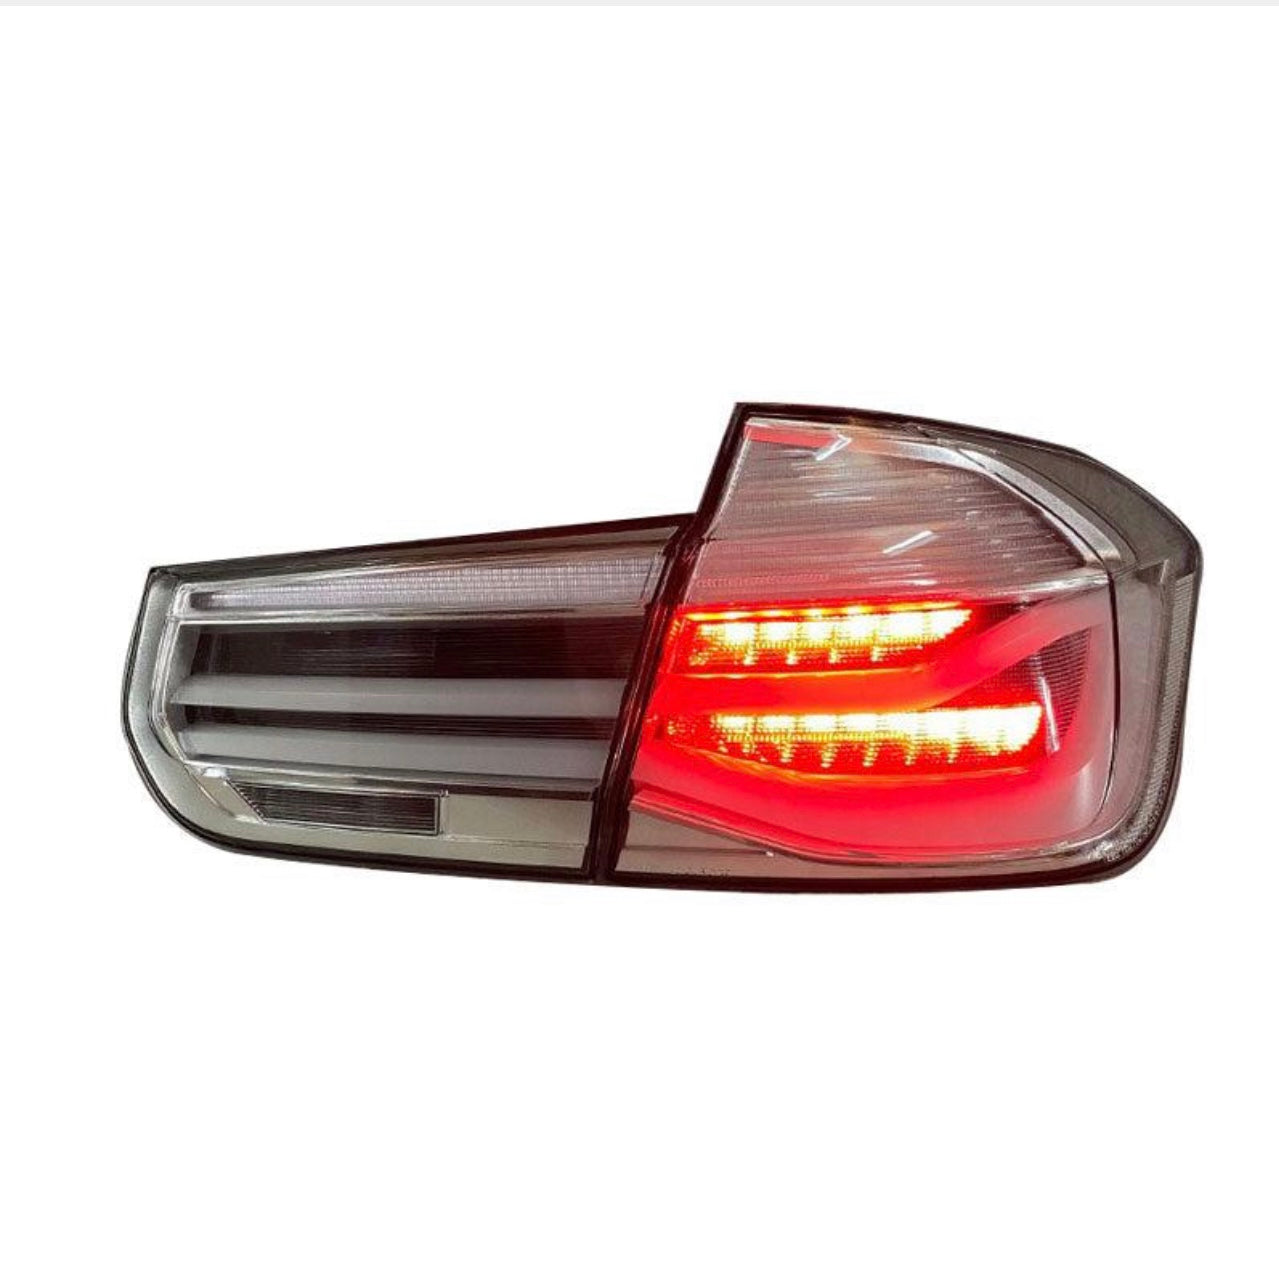 F80 M3 & F30 3 Series Euro Clear LCI Style Taillights (2012 - 2018)